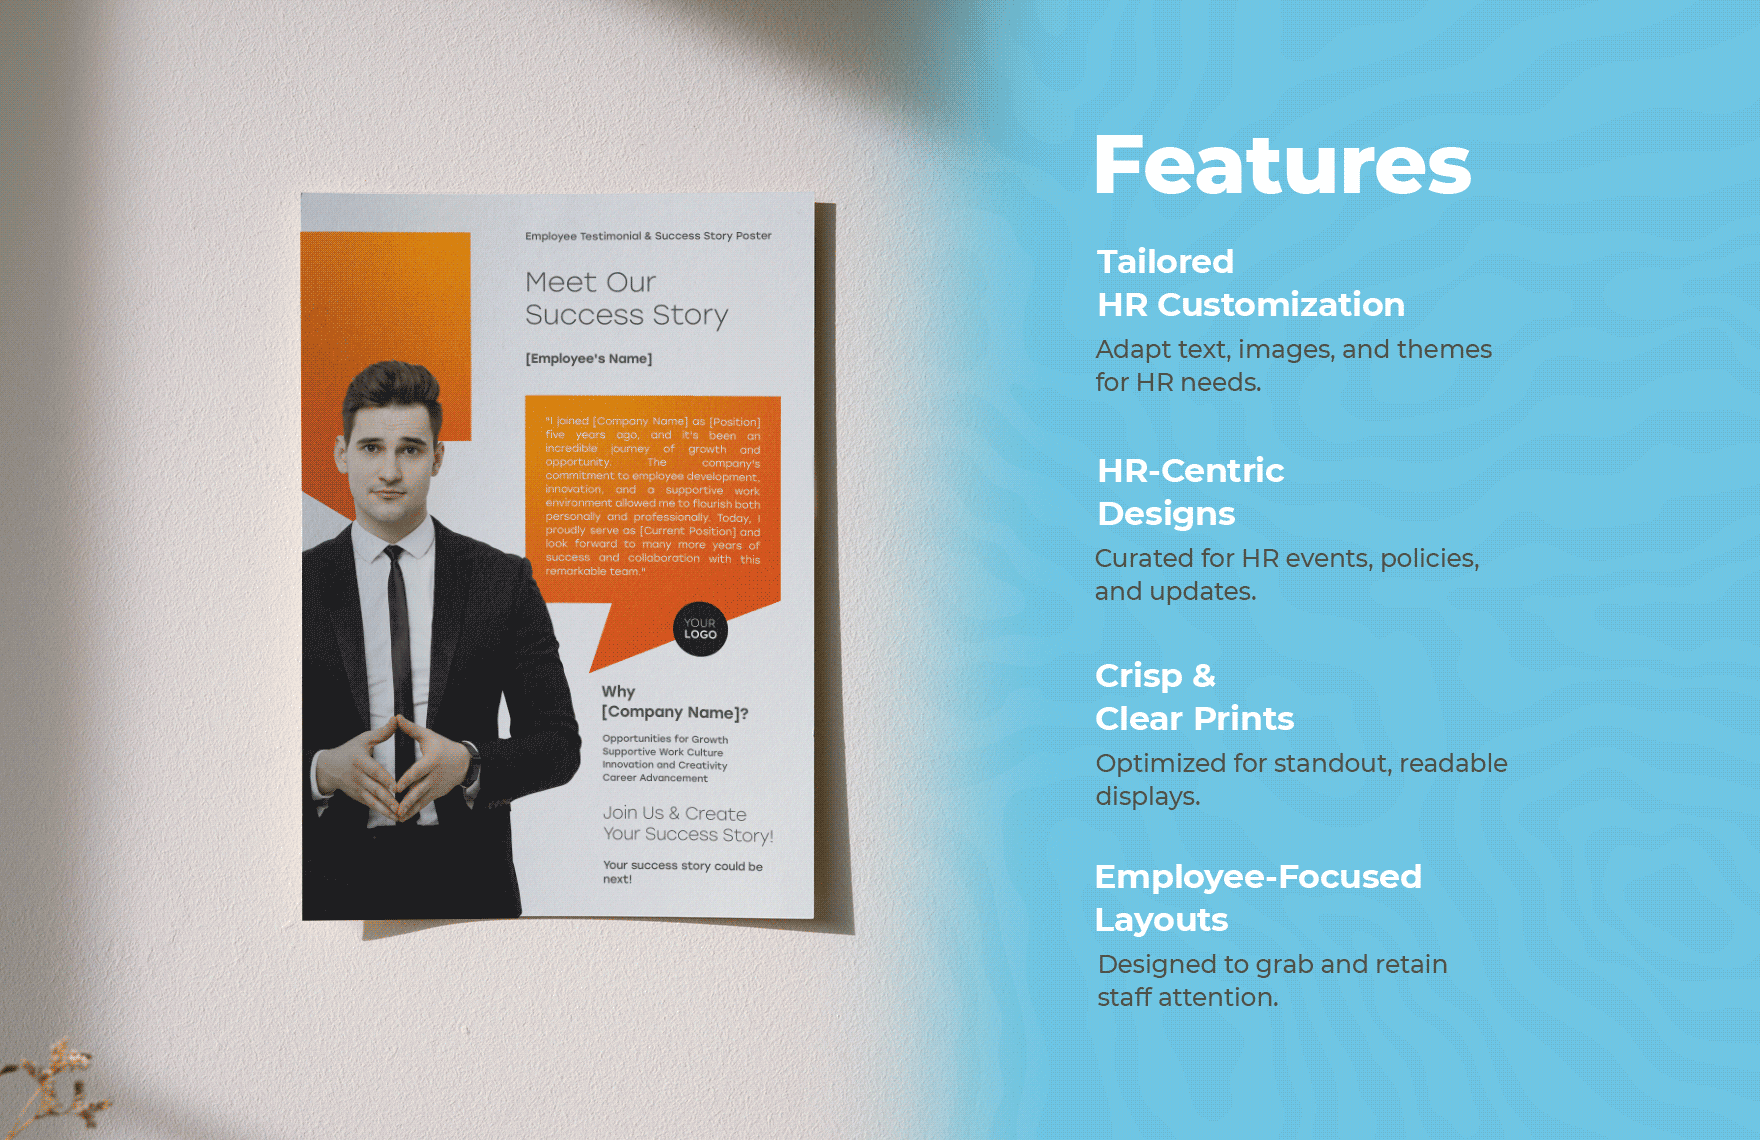 Employee Testimonial and Success Story Poster HR Template